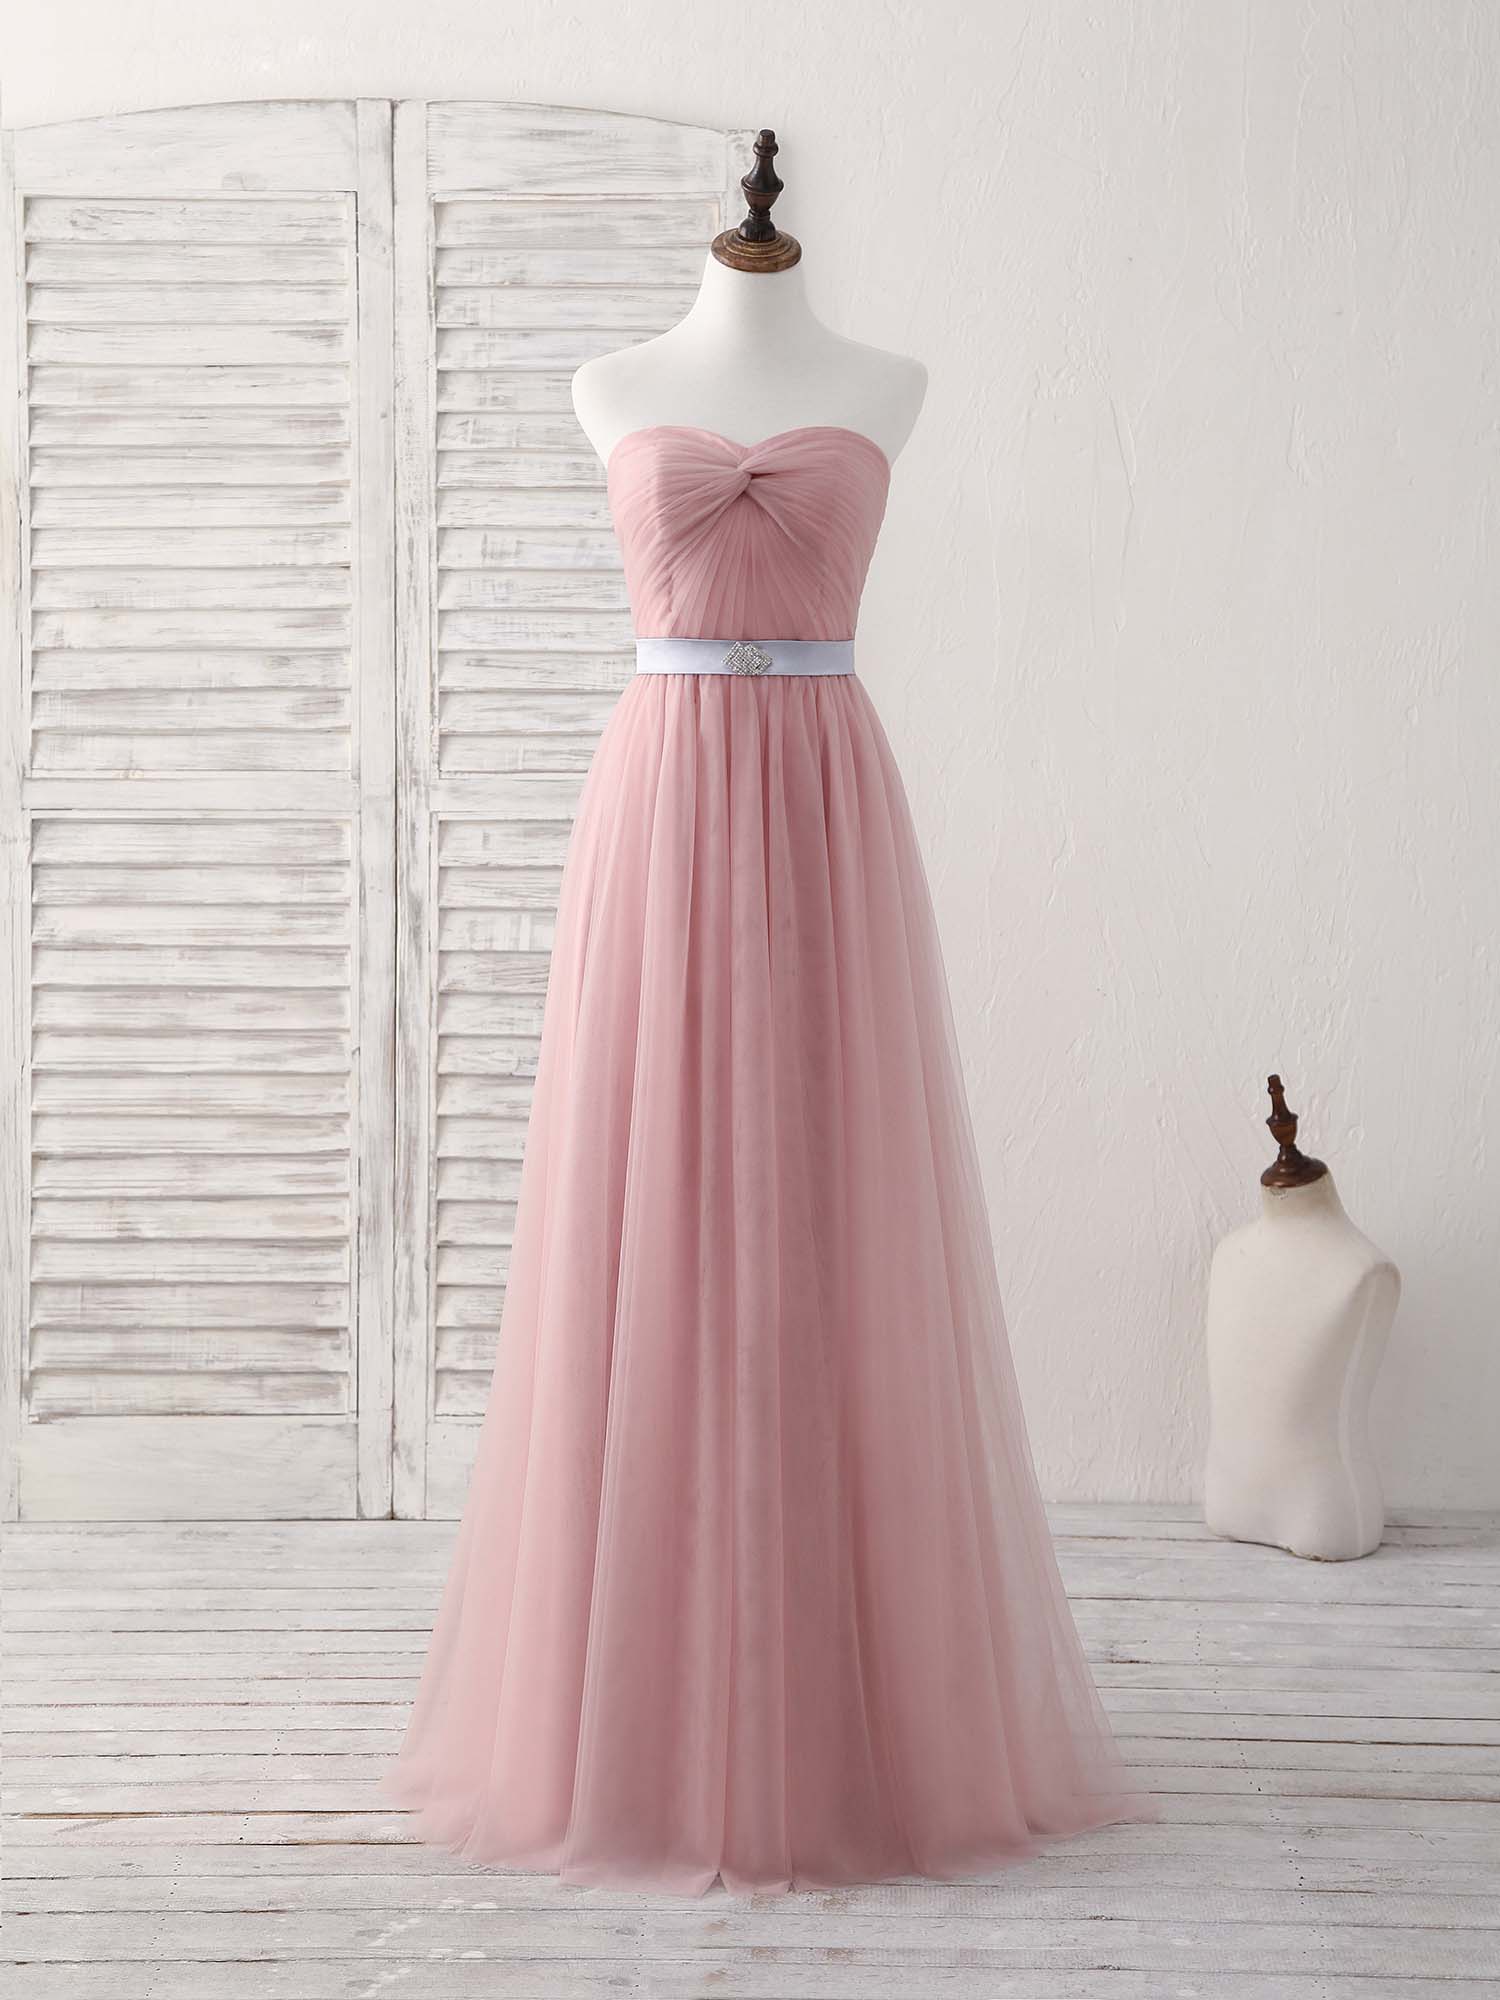 Pink Sweetheart Neck Tulle Long Corset Prom Dress, Aline Pink Corset Bridesmaid Dress outfit, Party Dress Teens